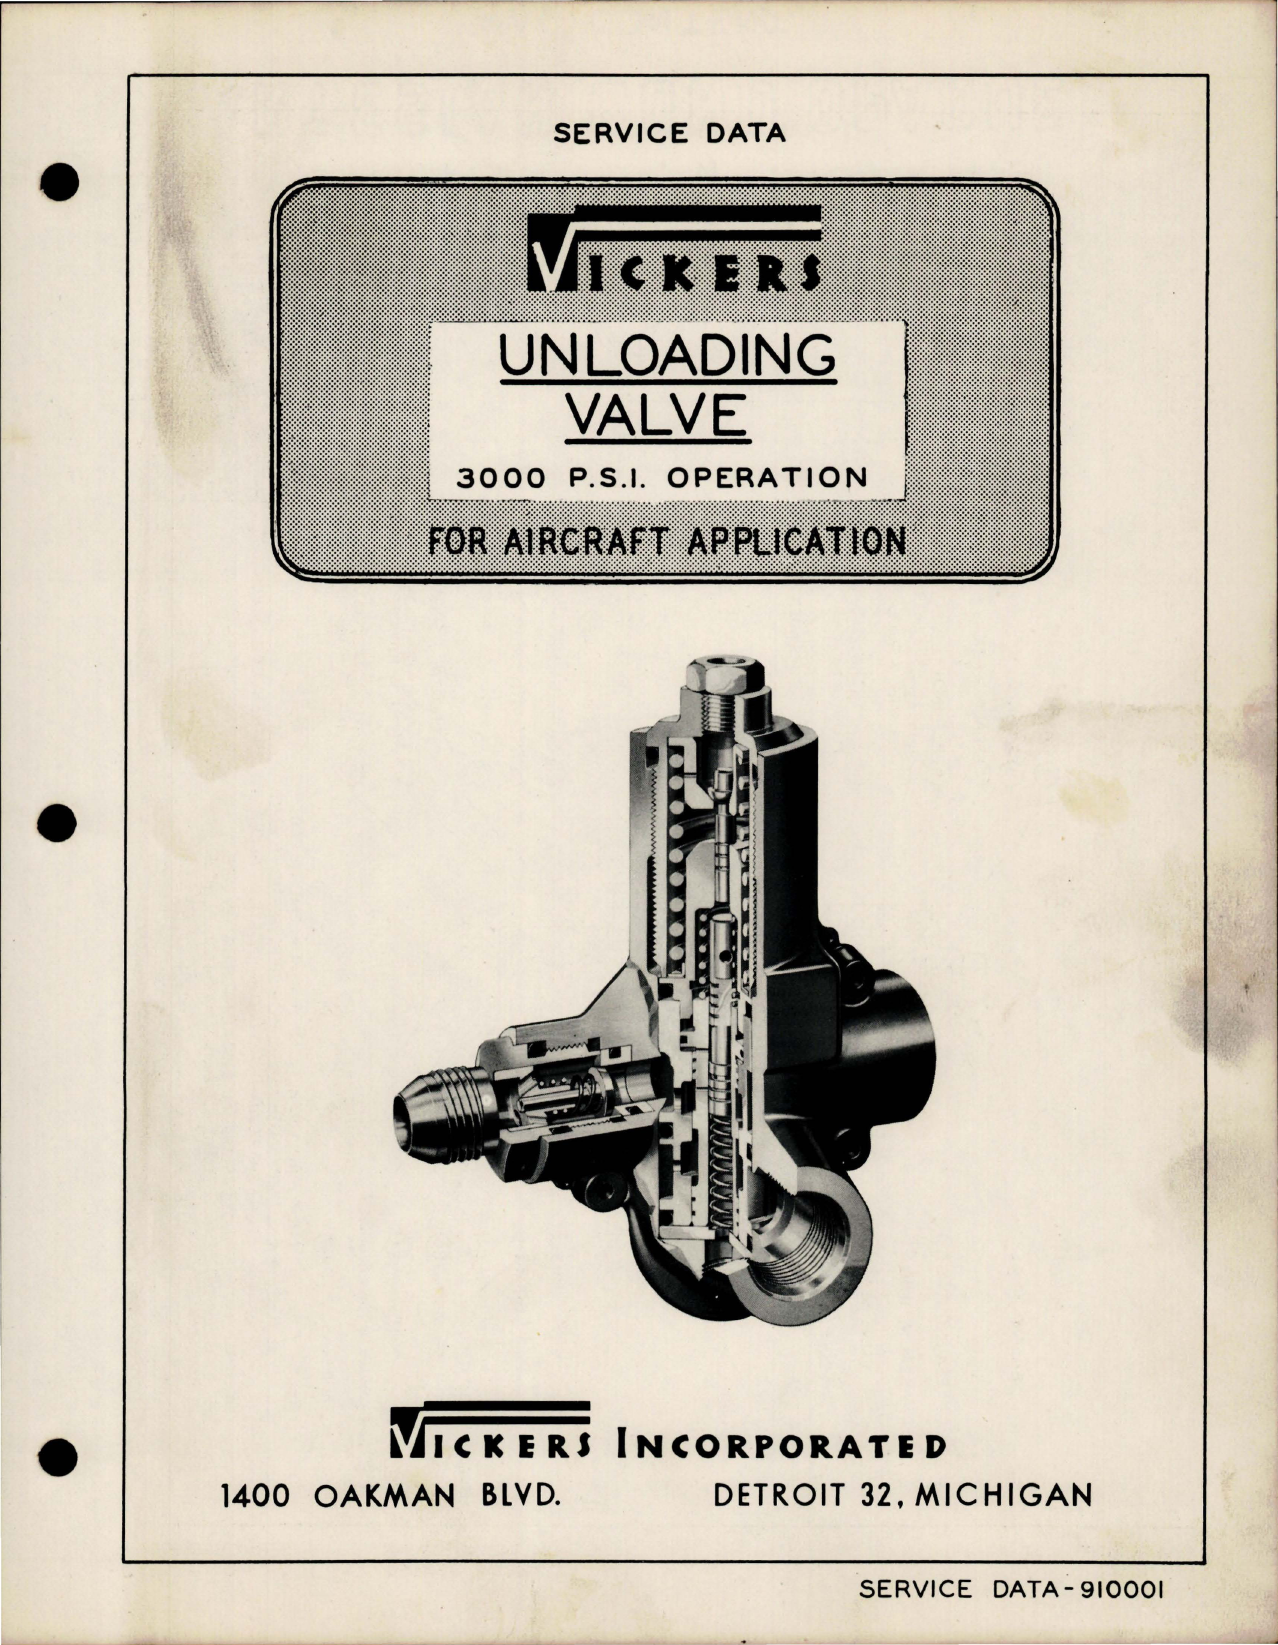 Sample page 1 from AirCorps Library document: Installation, Operation and Maintenance for Unloading Valve - 3000 PSI Operation